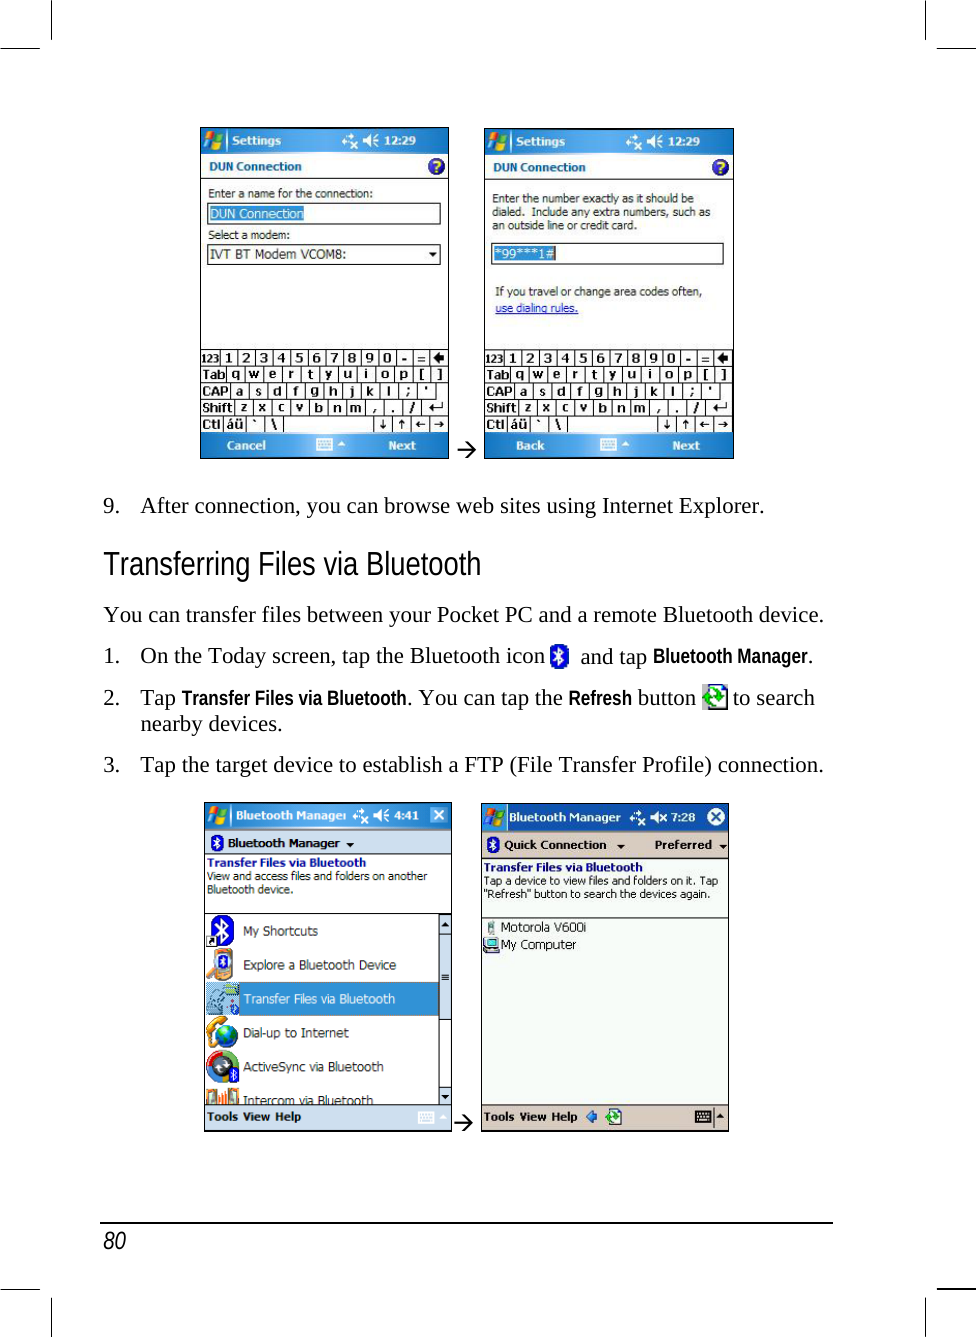  80    9.  After connection, you can browse web sites using Internet Explorer. Transferring Files via Bluetooth You can transfer files between your Pocket PC and a remote Bluetooth device.  1.  On the Today screen, tap the Bluetooth icon    and tap Bluetooth Manager. 2. Tap Transfer Files via Bluetooth. You can tap the Refresh button   to search nearby devices. 3.  Tap the target device to establish a FTP (File Transfer Profile) connection.    